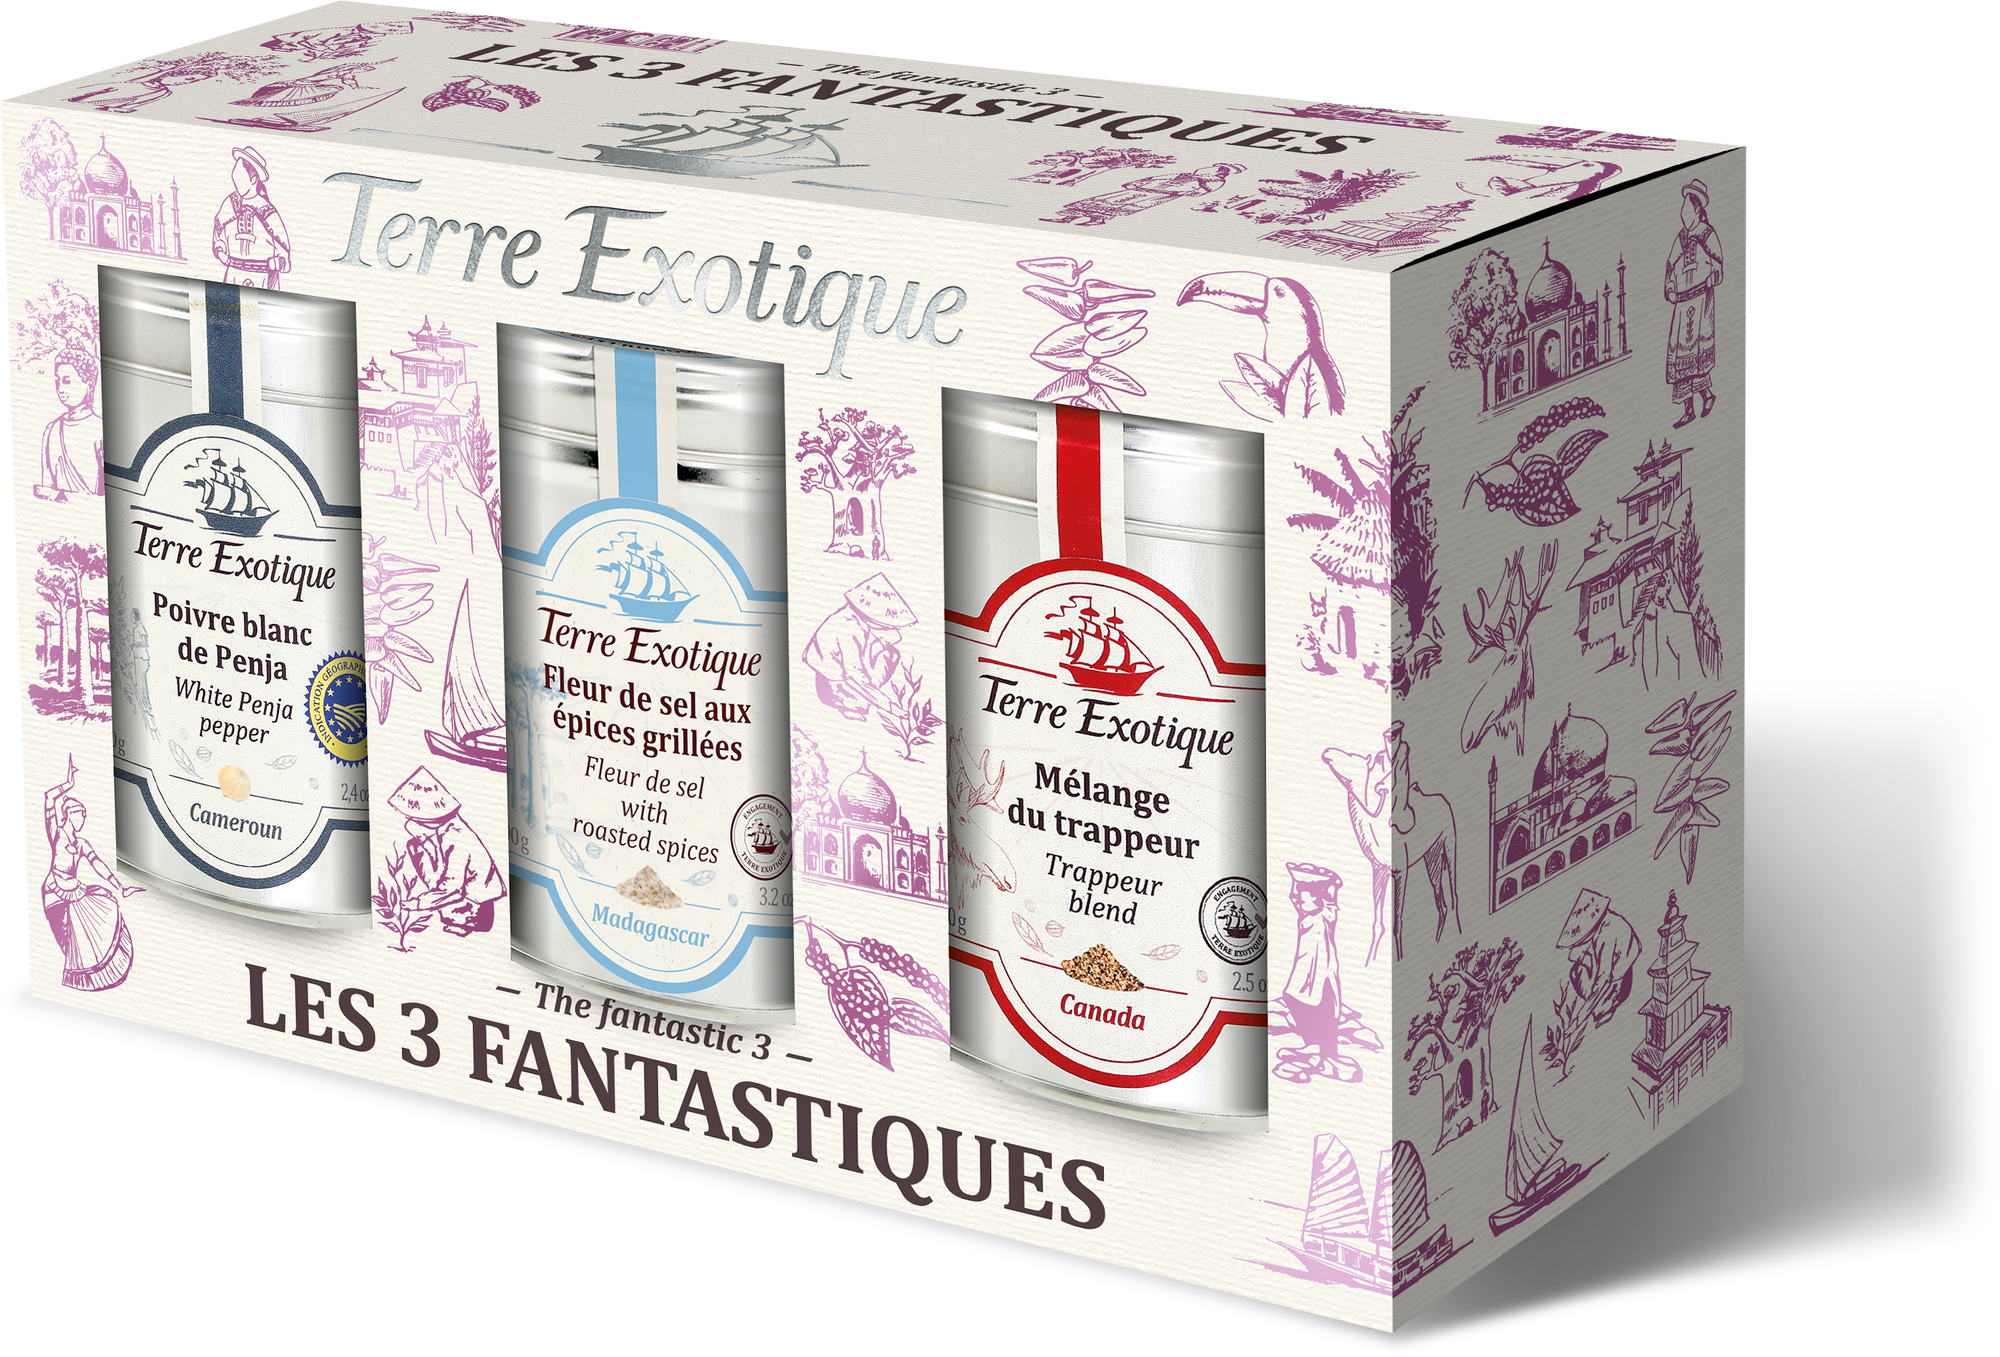 Terre Exotique 'The Fantastic 3' Gift Box